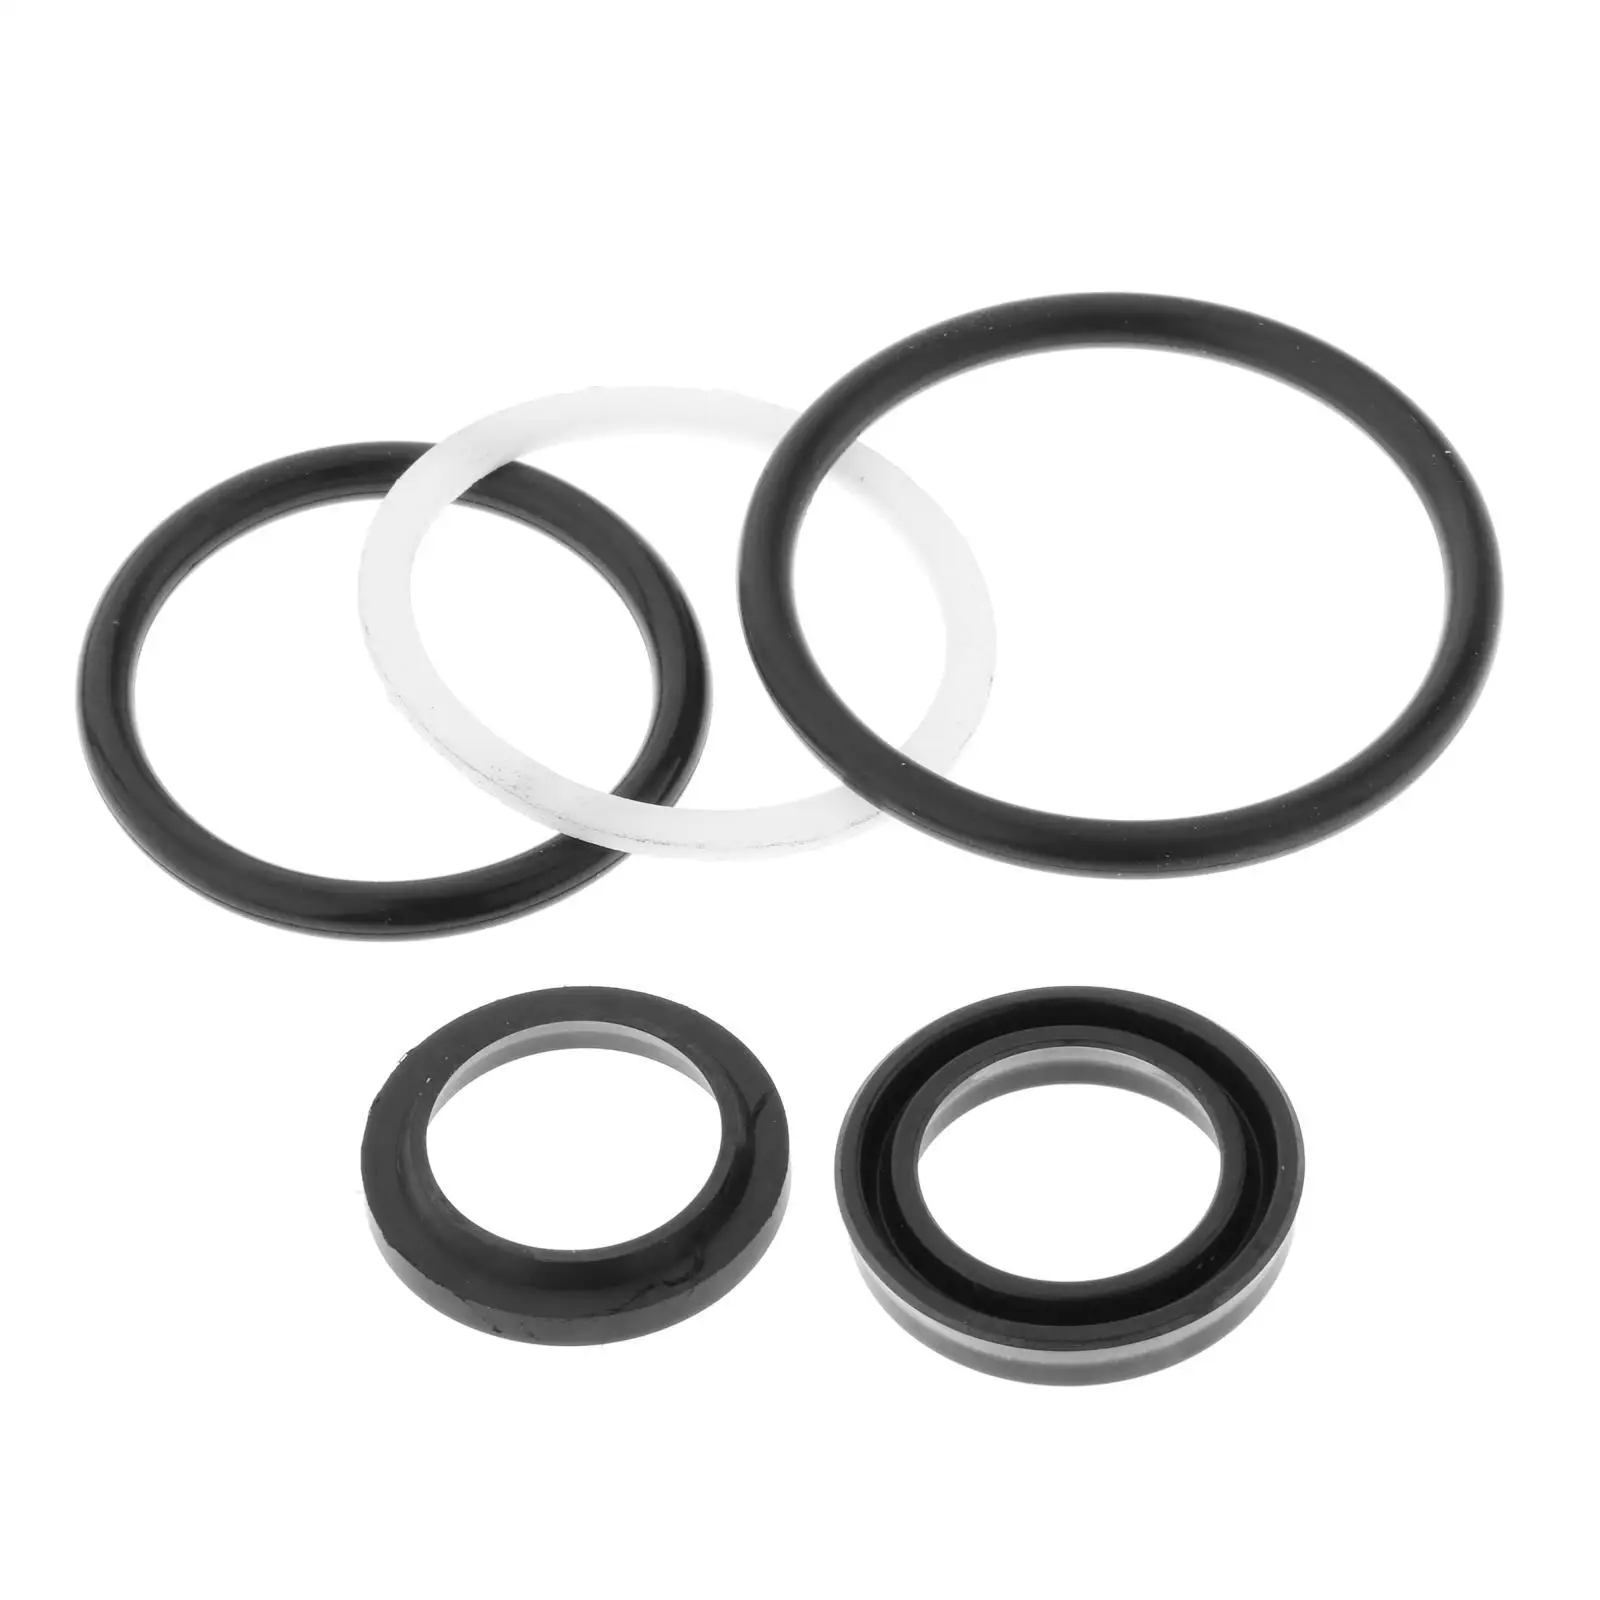 Trim Cylinder Repair Kit O-Ring 6G5-43864-00 for Yamaha Outboard Parts